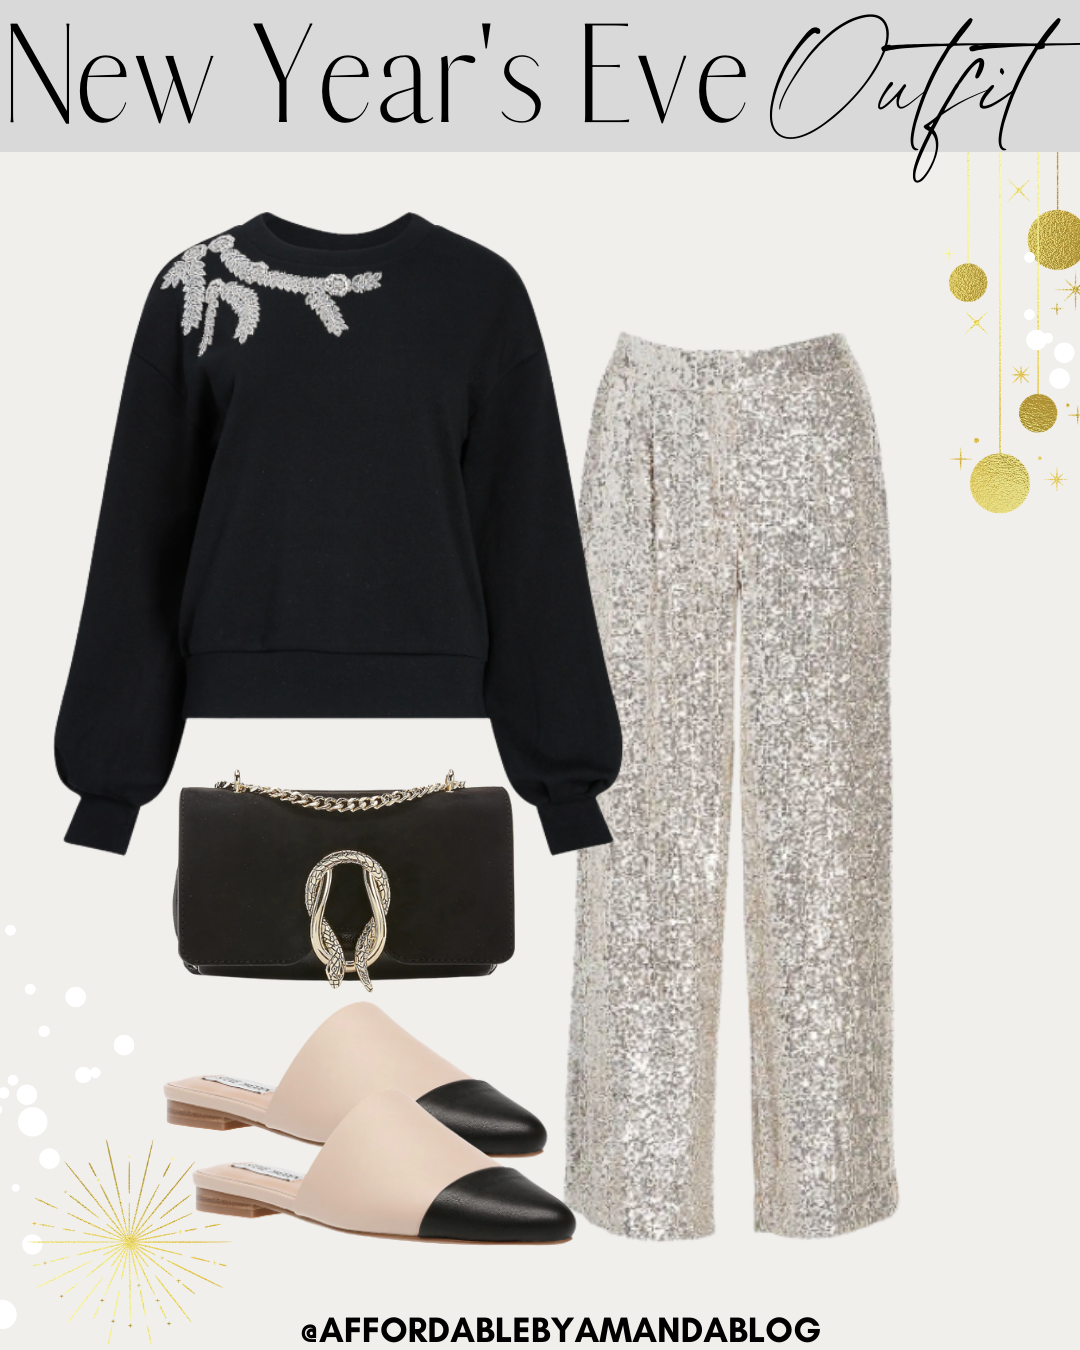 New Year's Eve Outfit Ideas 2020 | Affordable by Amanda